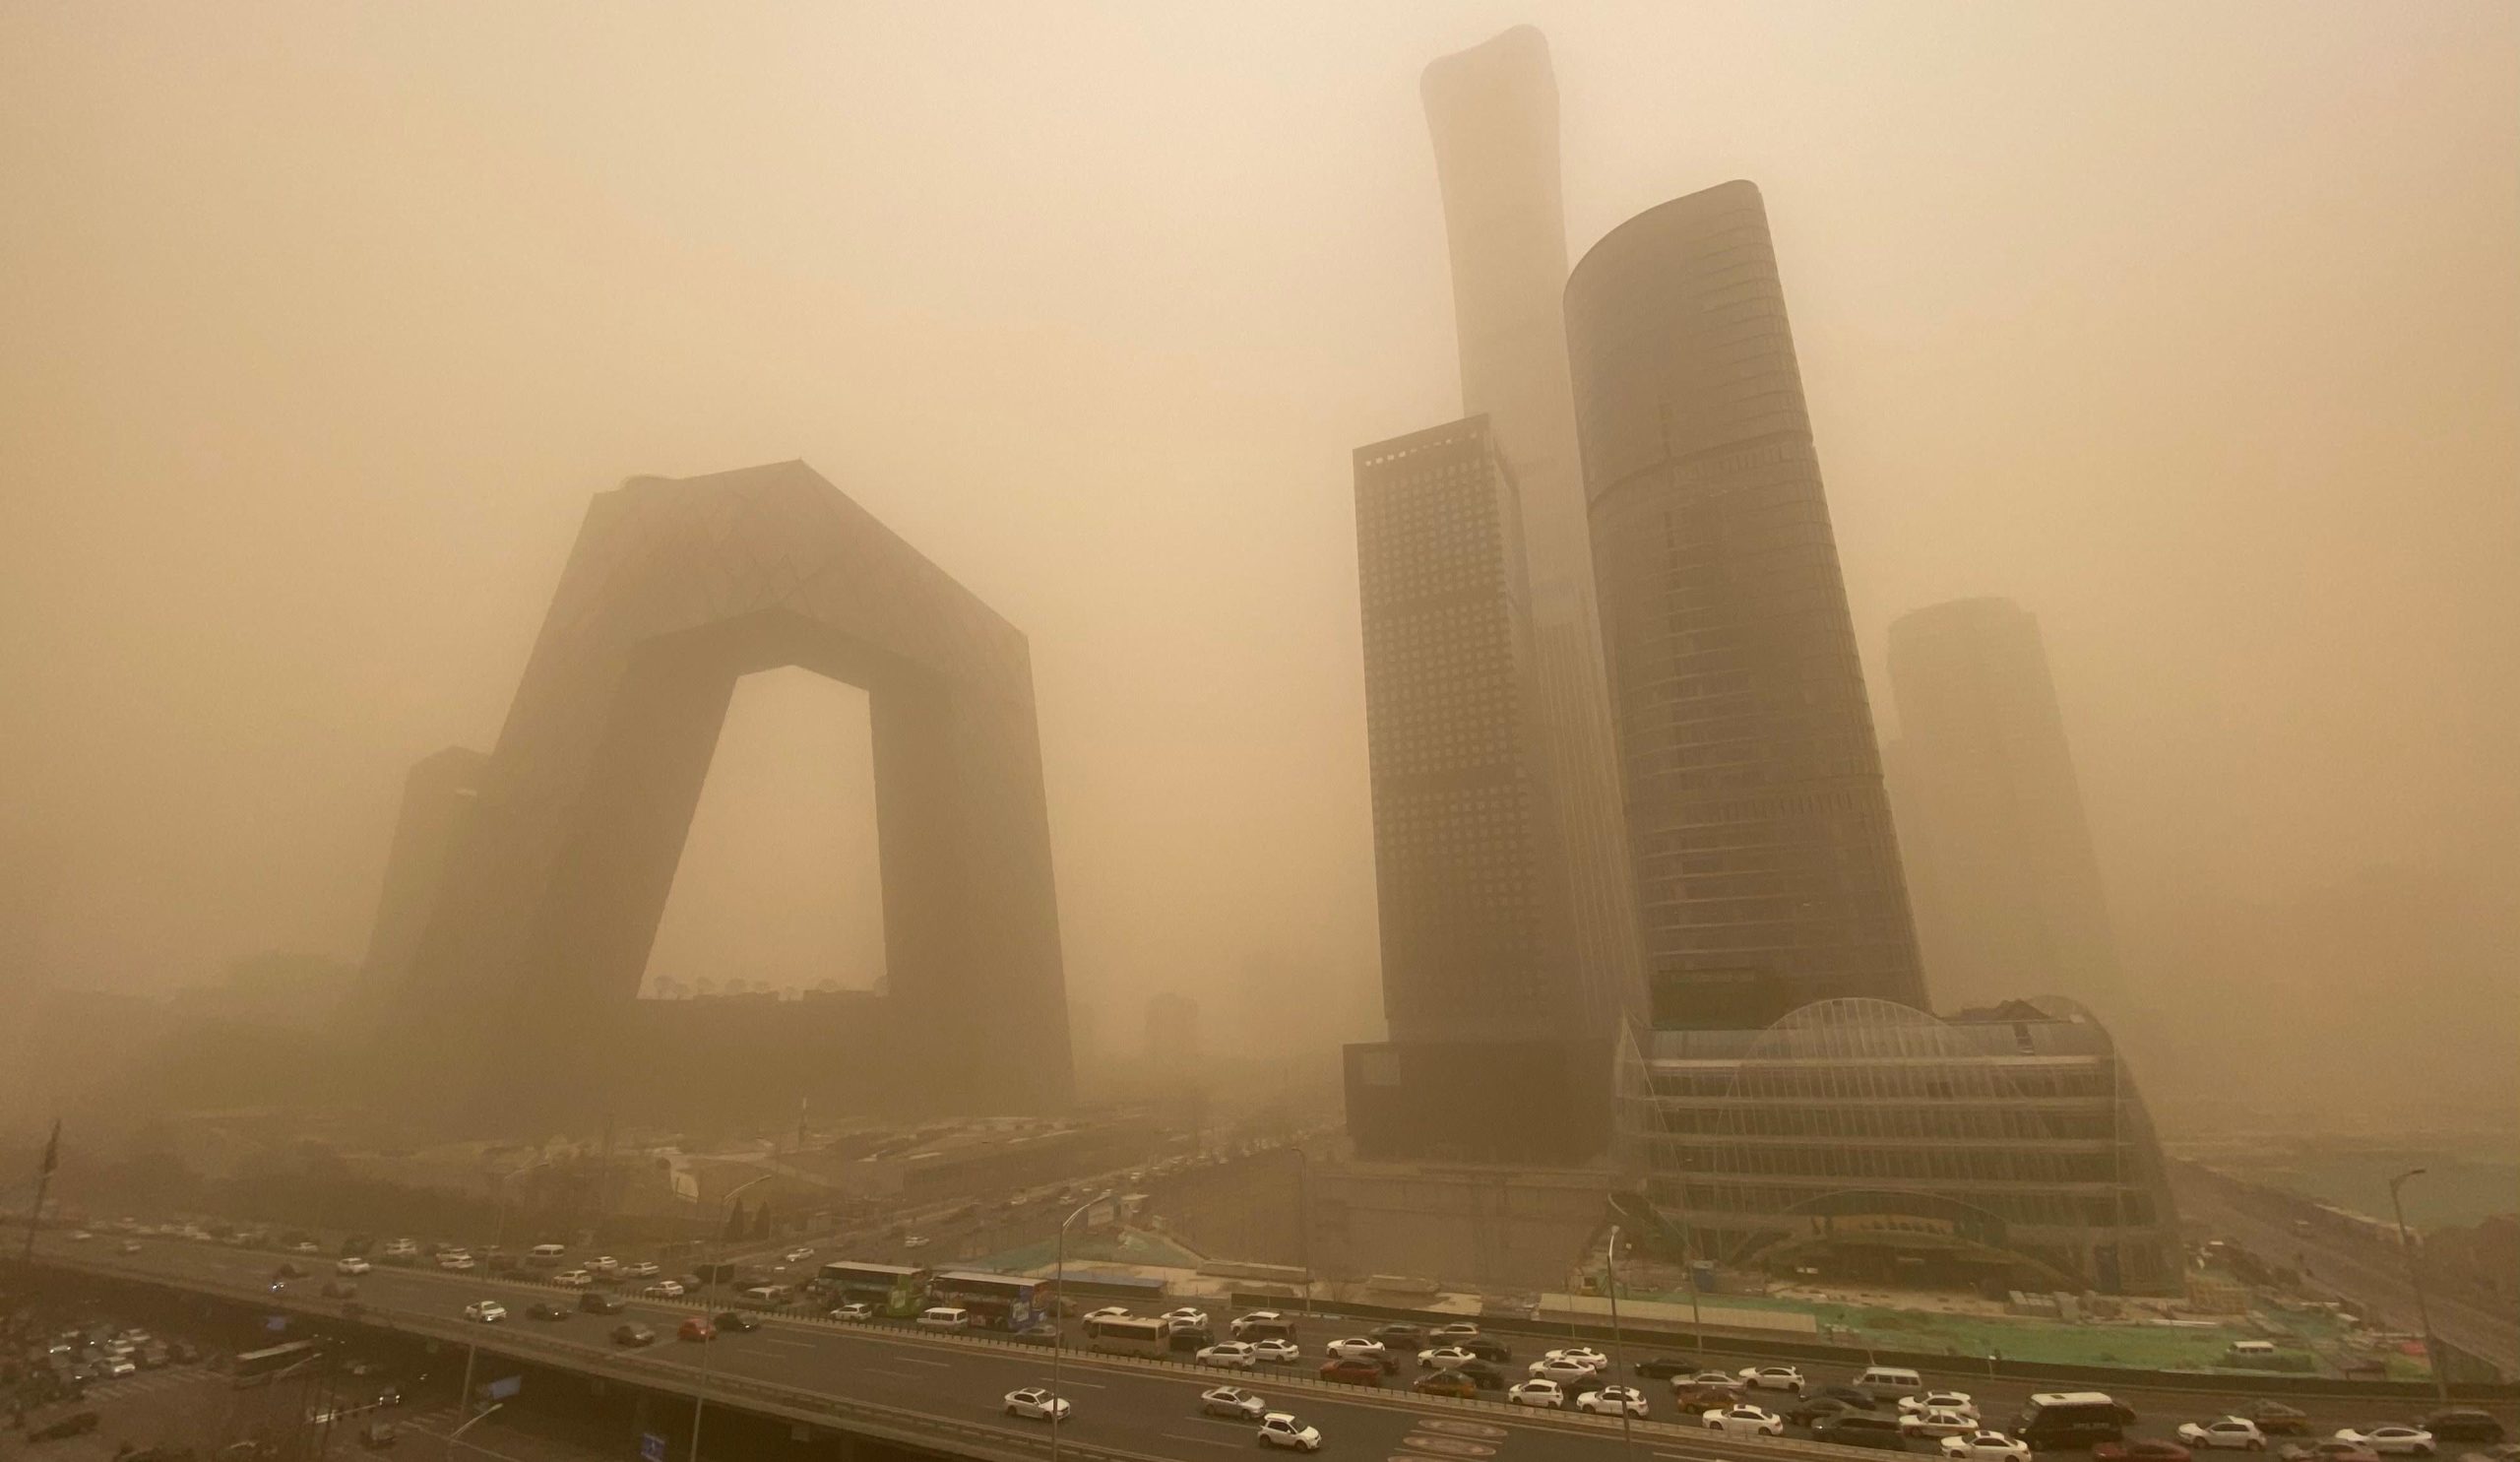 Buildings are seen in the central business district of Beijing during a sandstorm on March 15, 2021.  (Photo: Leo Ramirez, Getty Images)